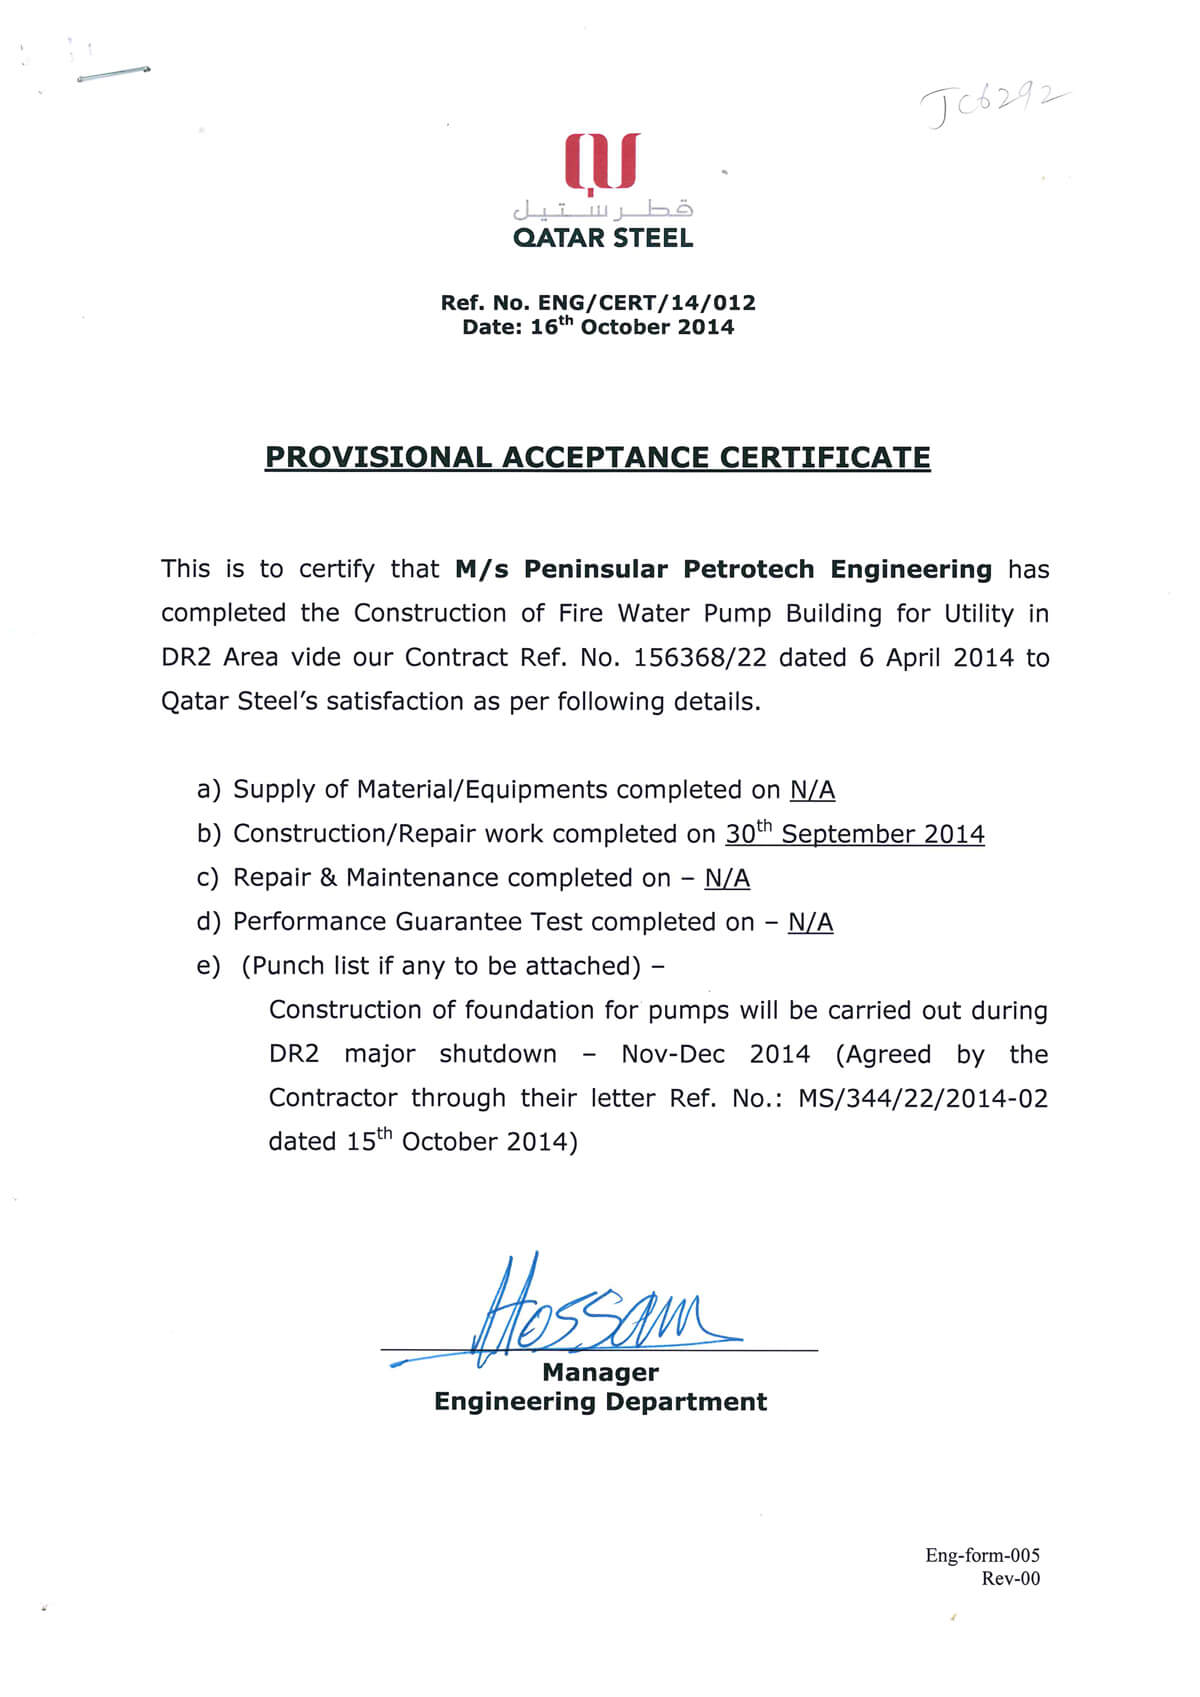 28+ [ Certification Letter Construction ] | Doc 7281019 Job With Certificate Of Completion Template Construction